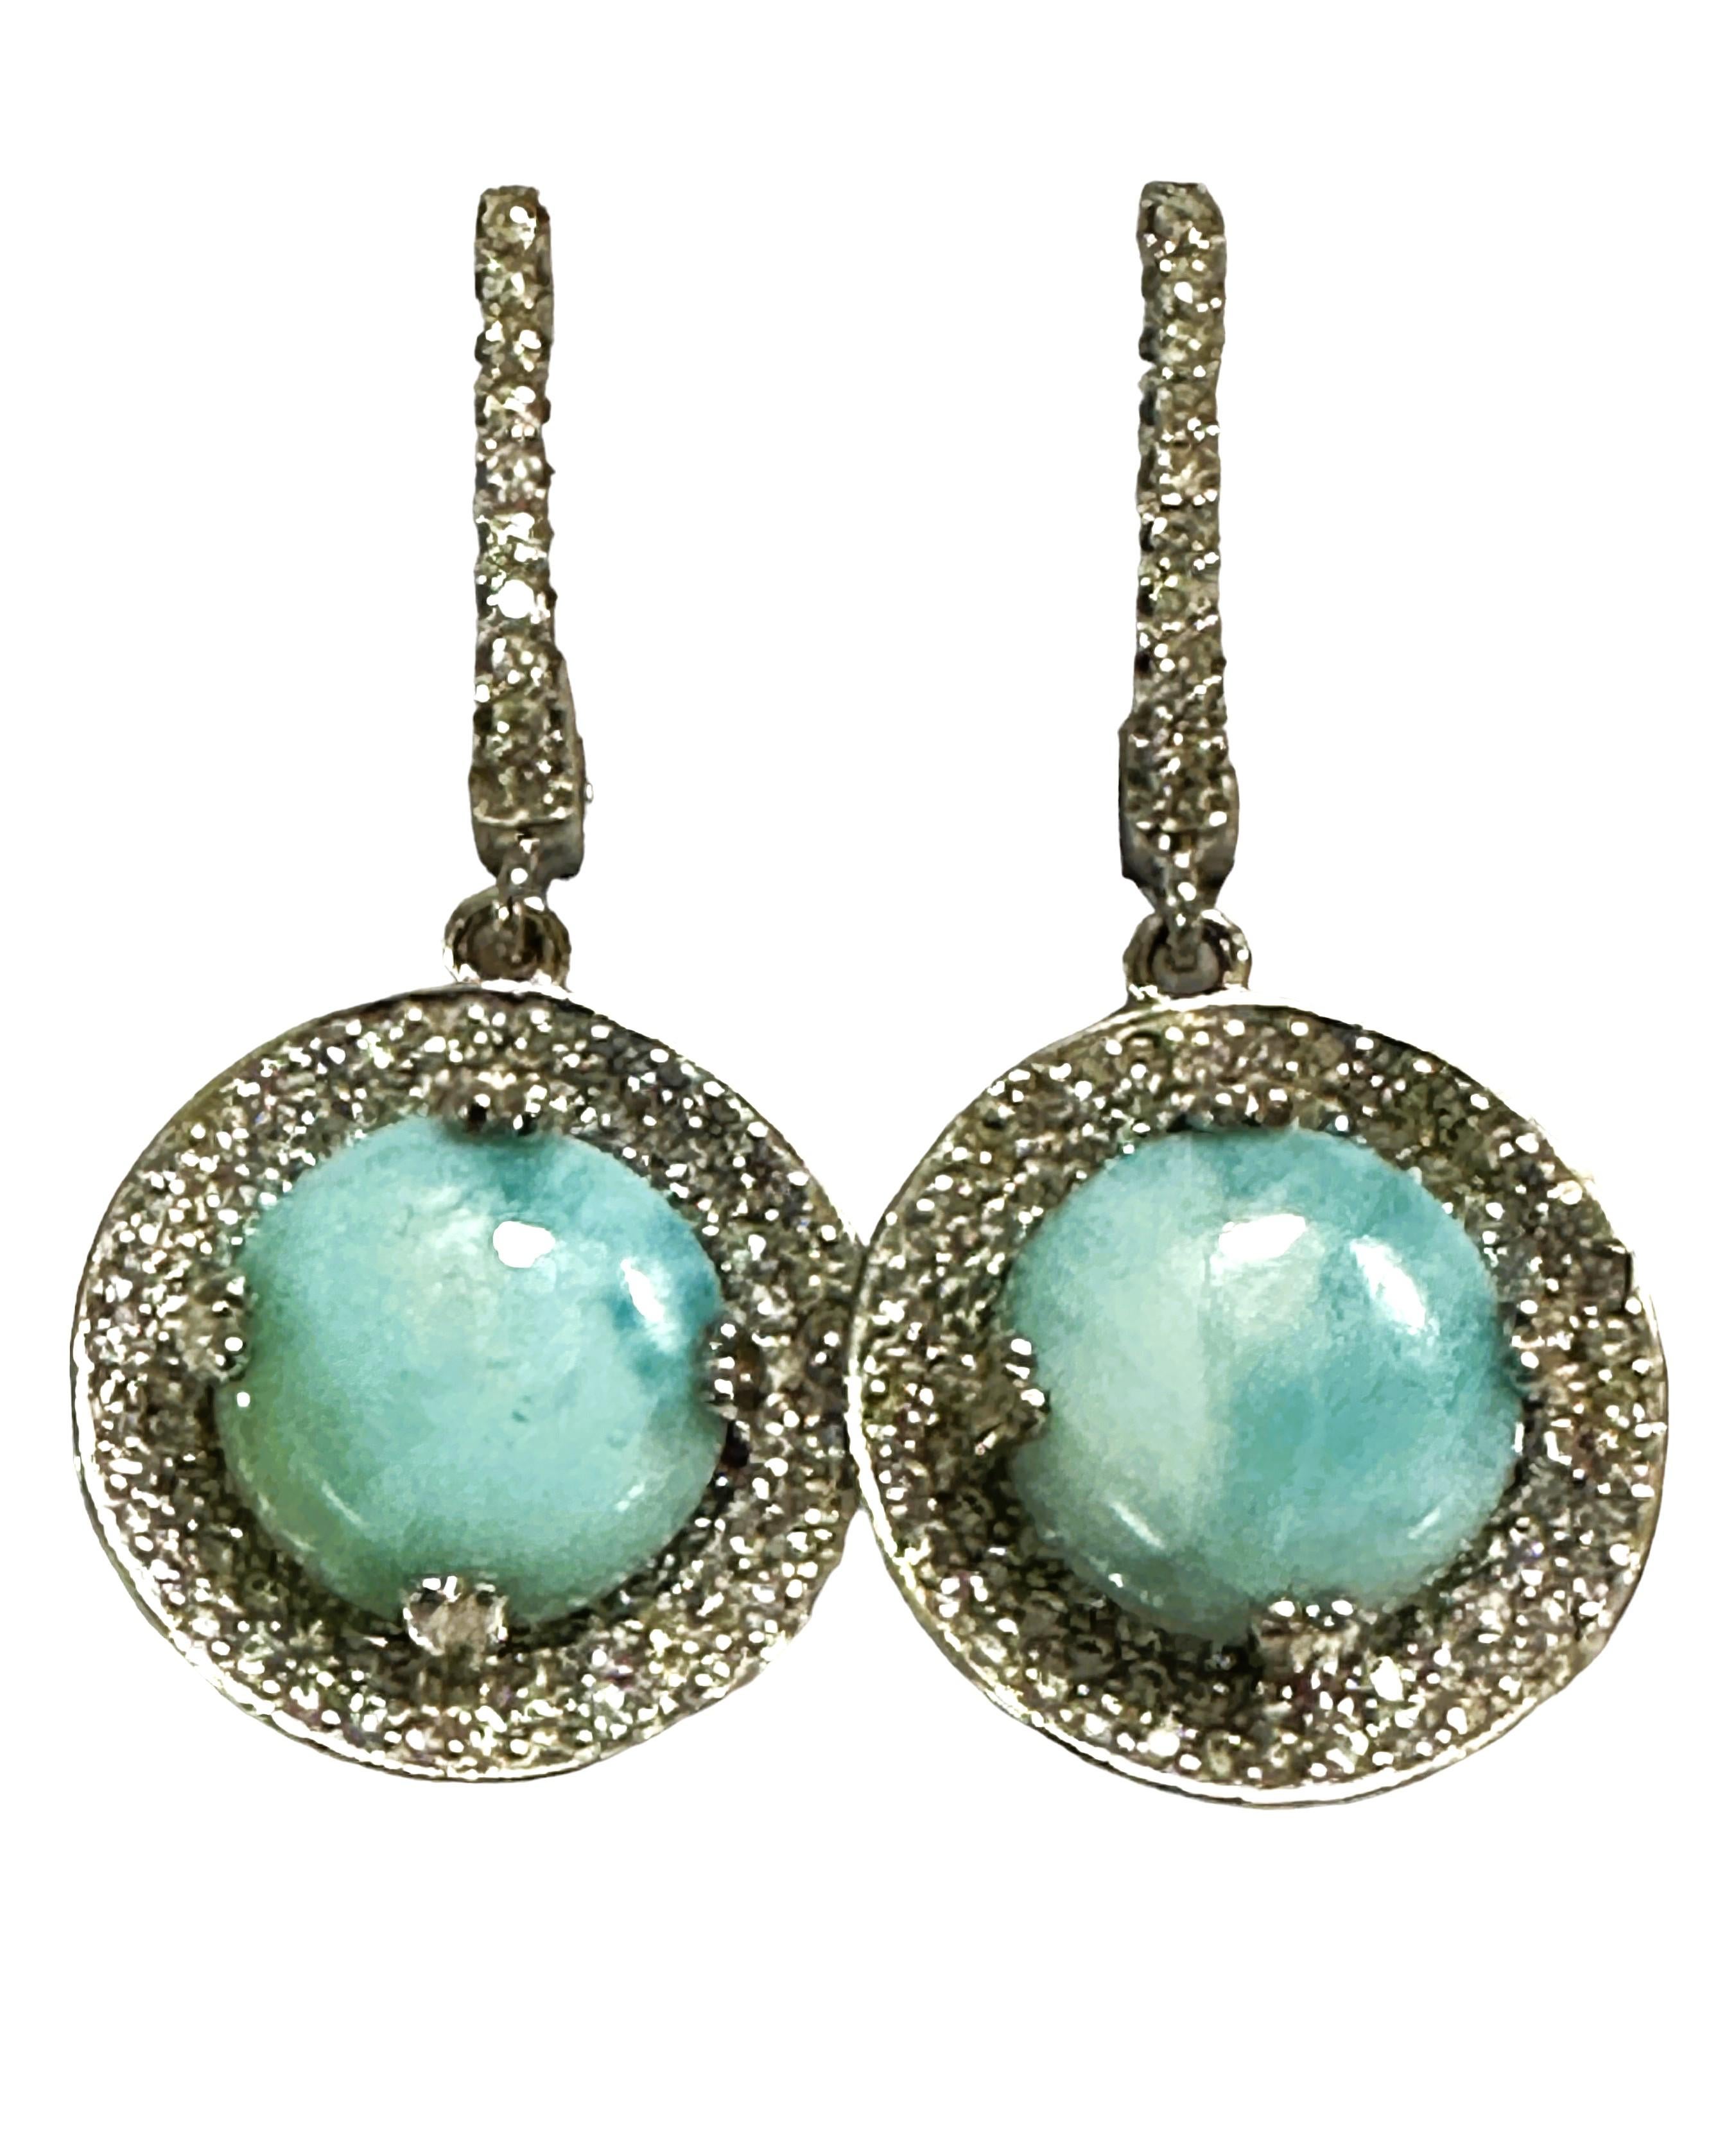 New Sterling Dominican Larimar Necklace and Earrings set For Sale 4